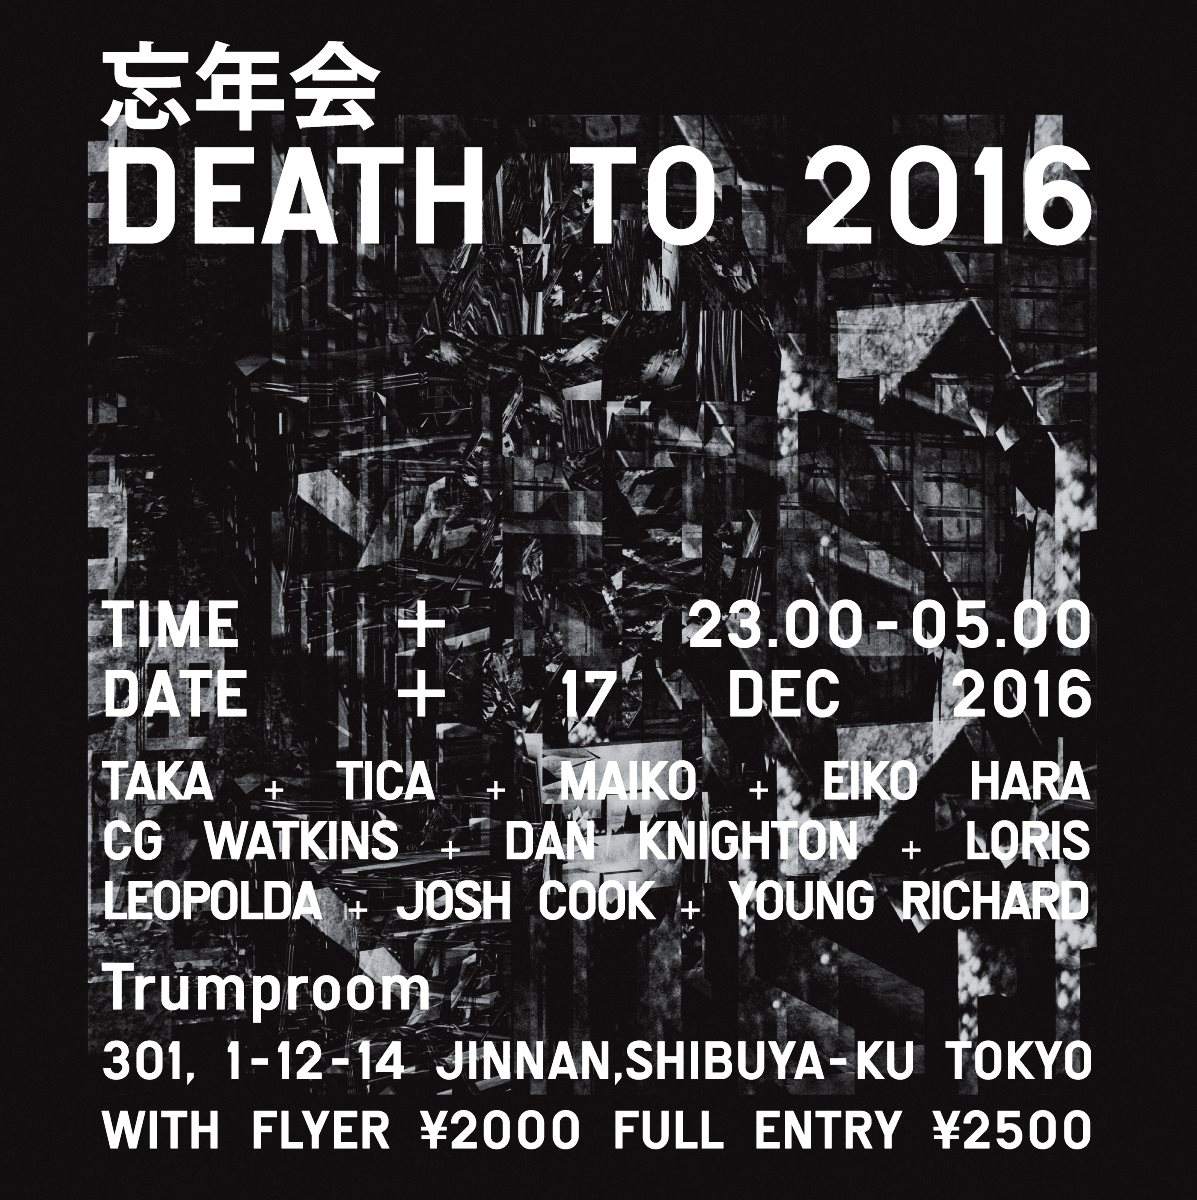 Death to 2016 忘年会 End of Year Party - Página frontal